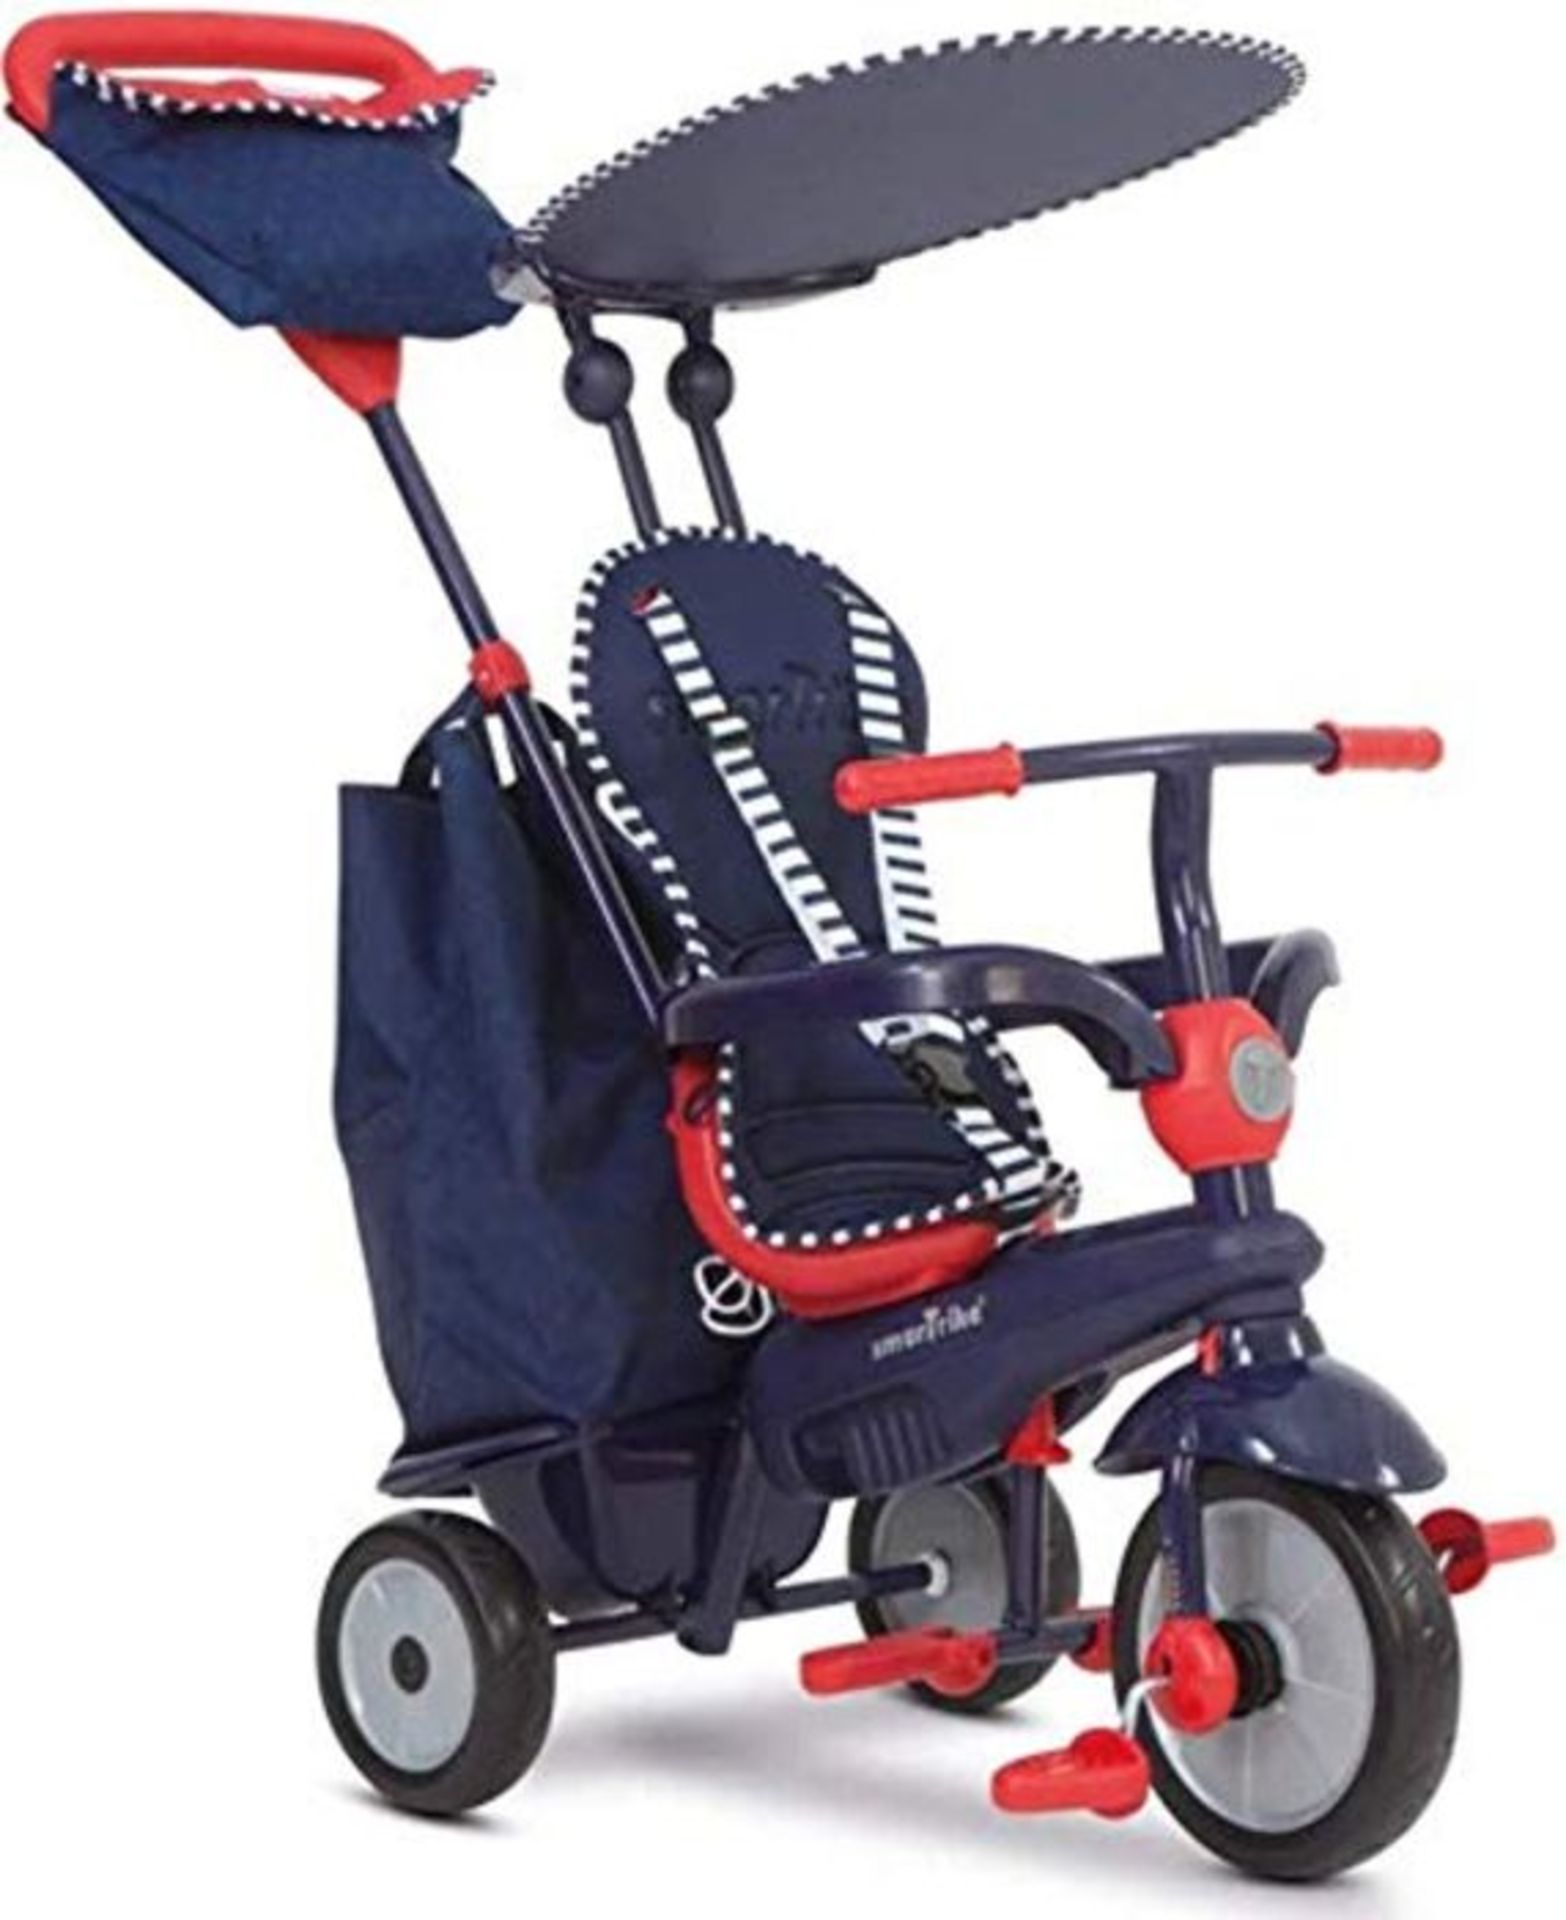 RRP £85.00 smarTrike Shine Baby Tricycle for 1 Year Old, Navy Blue